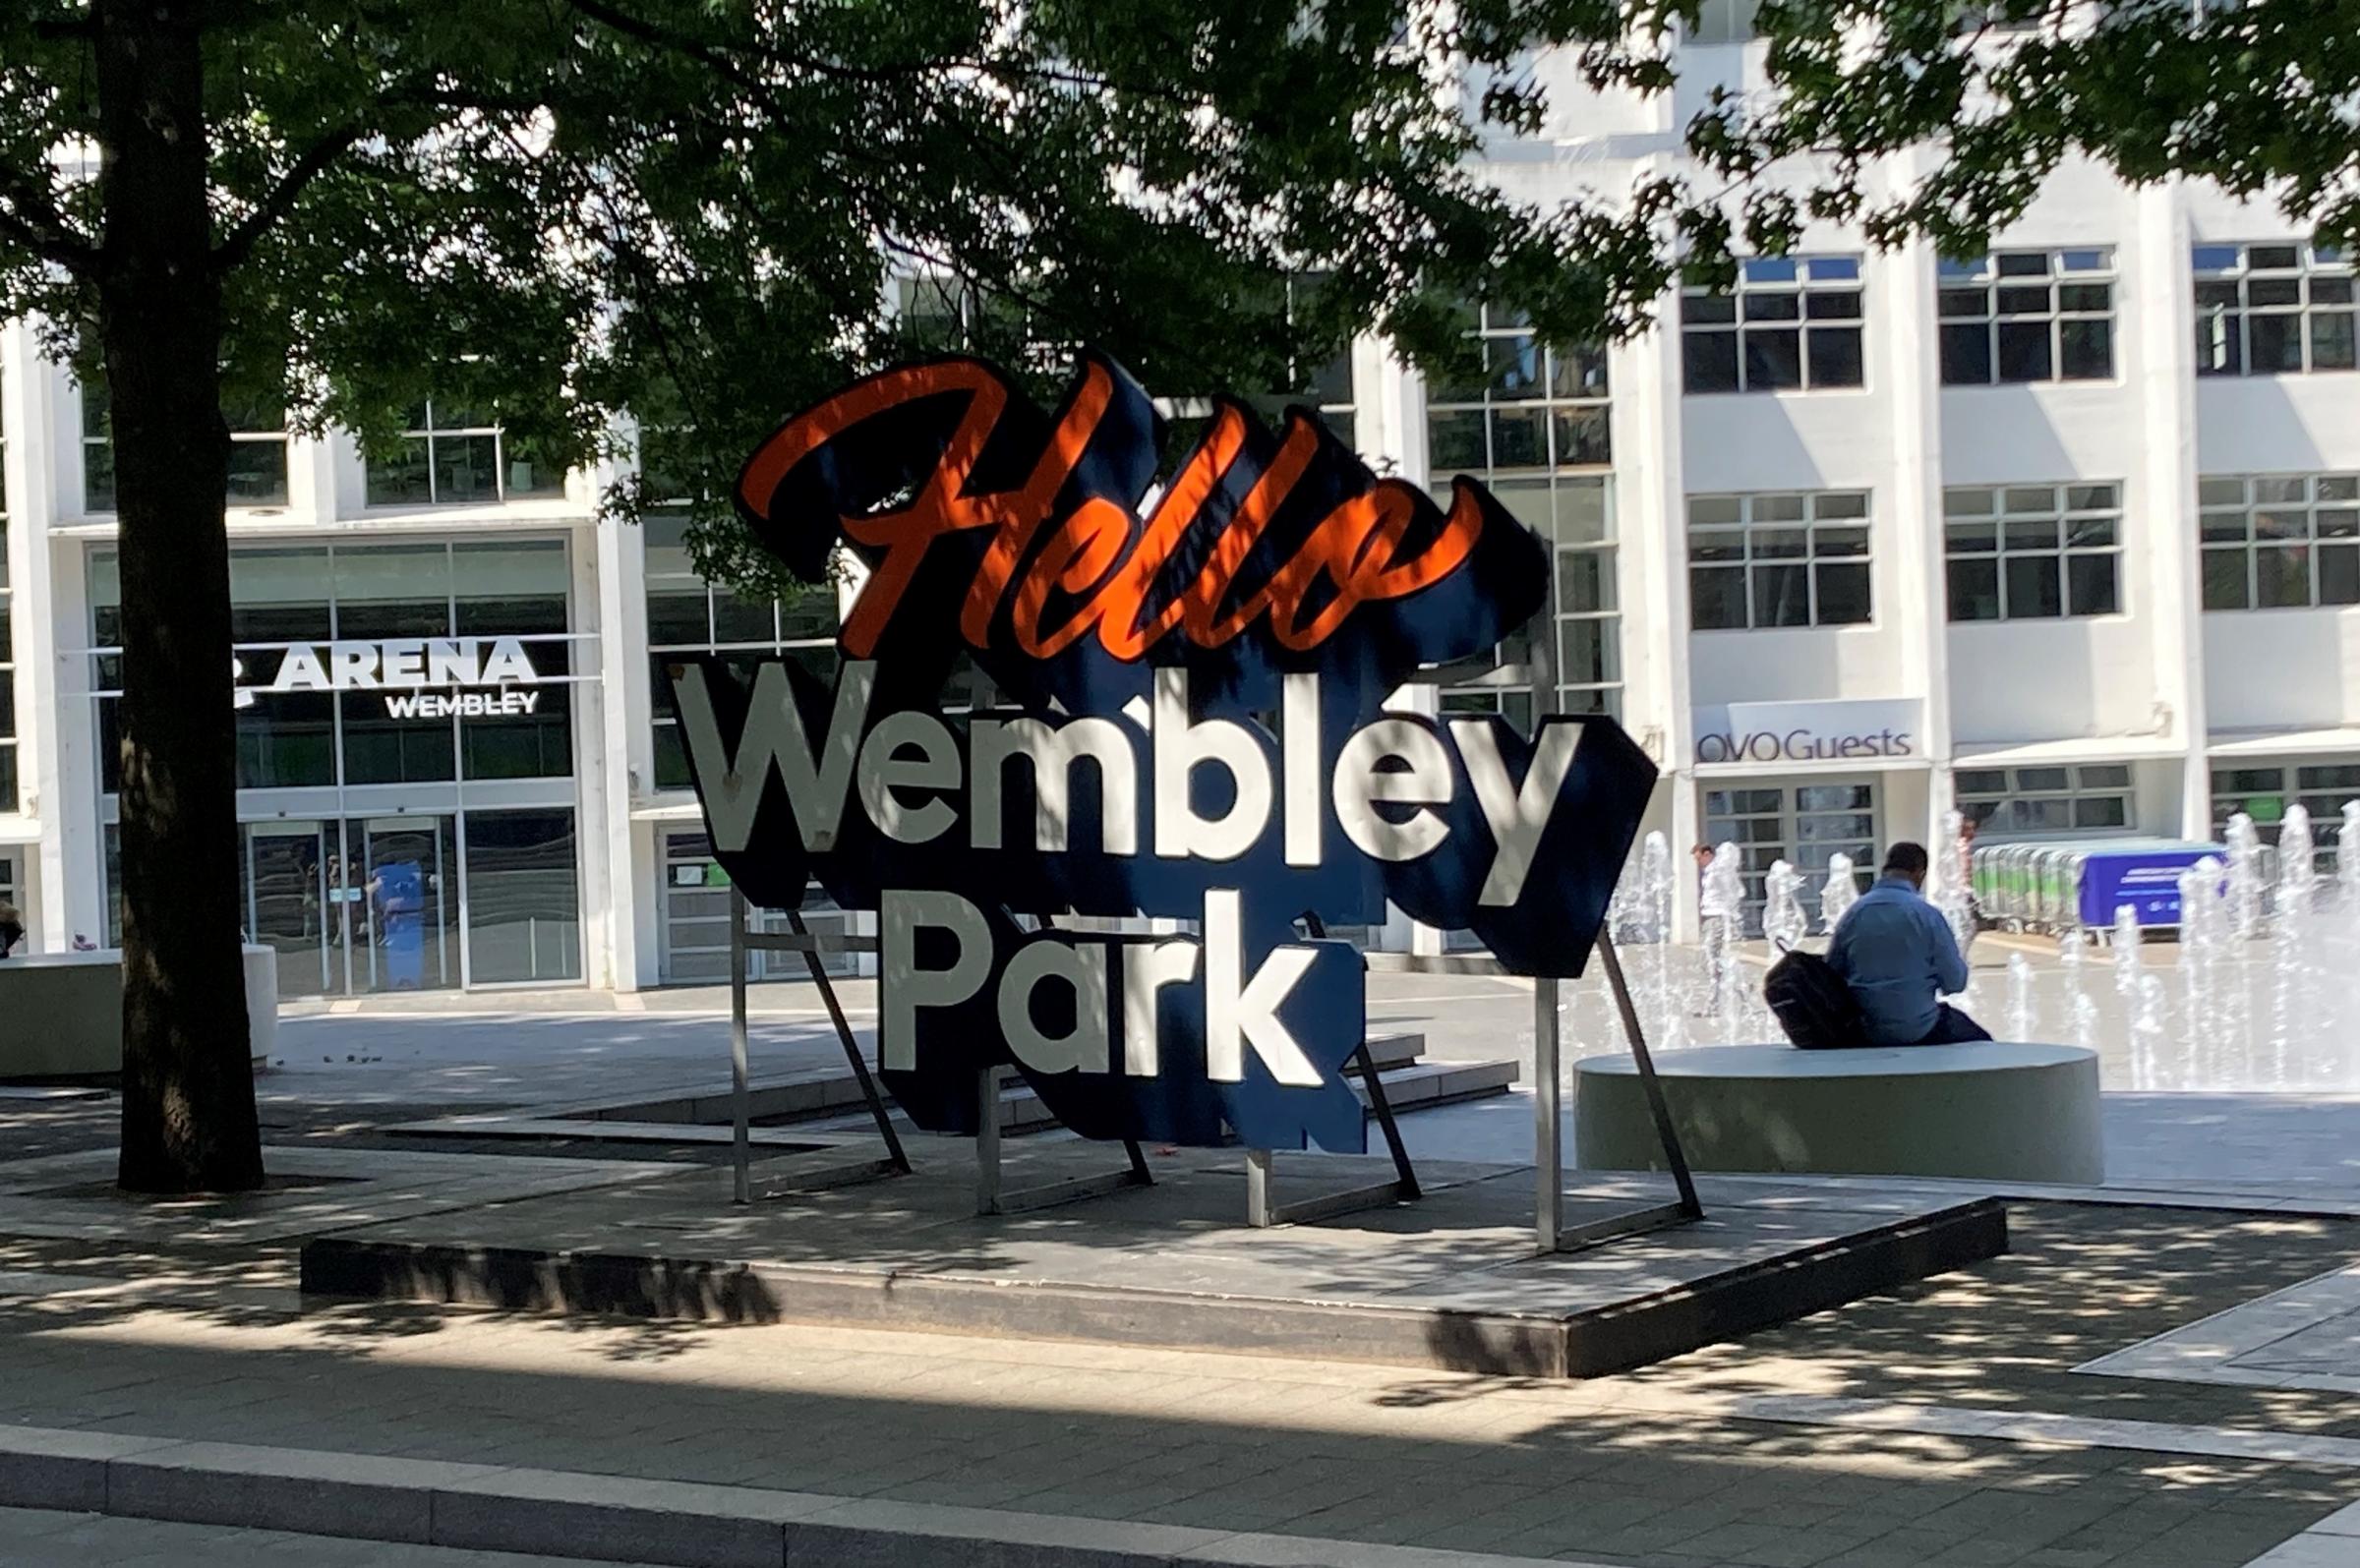 Wembley Park Sign. The Wembley Park district is also home to BOXPARK, the OVO Arena, and Brent Civic Centre. Image Credit: Grant Williams